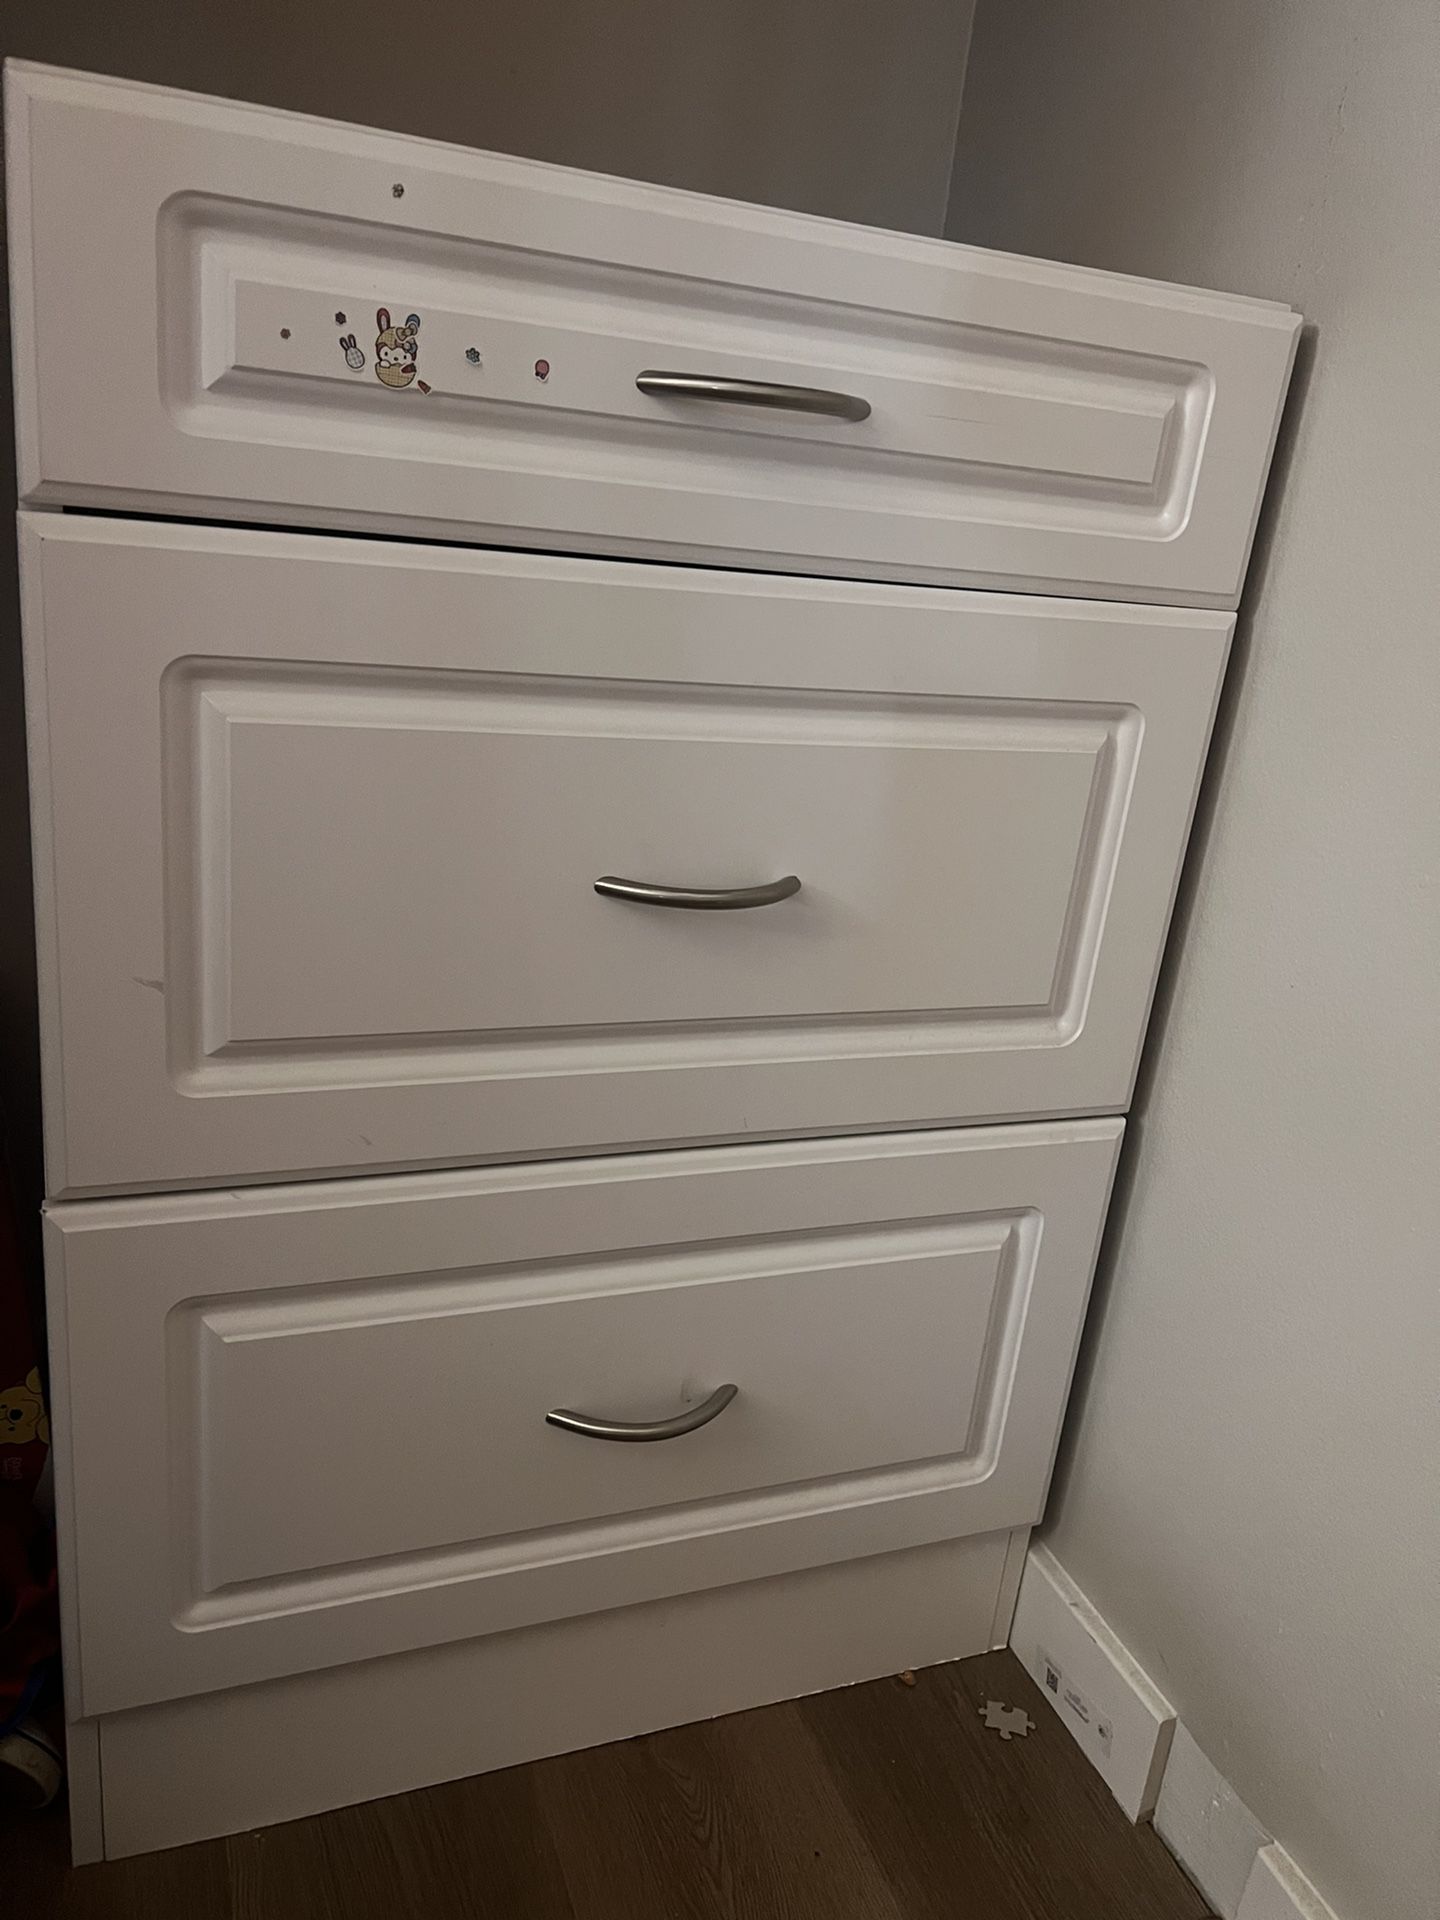 Two White Dressers! MOVE OUT SALE !! Moving Out Of STATE, Need This Stuff Gone ASAP